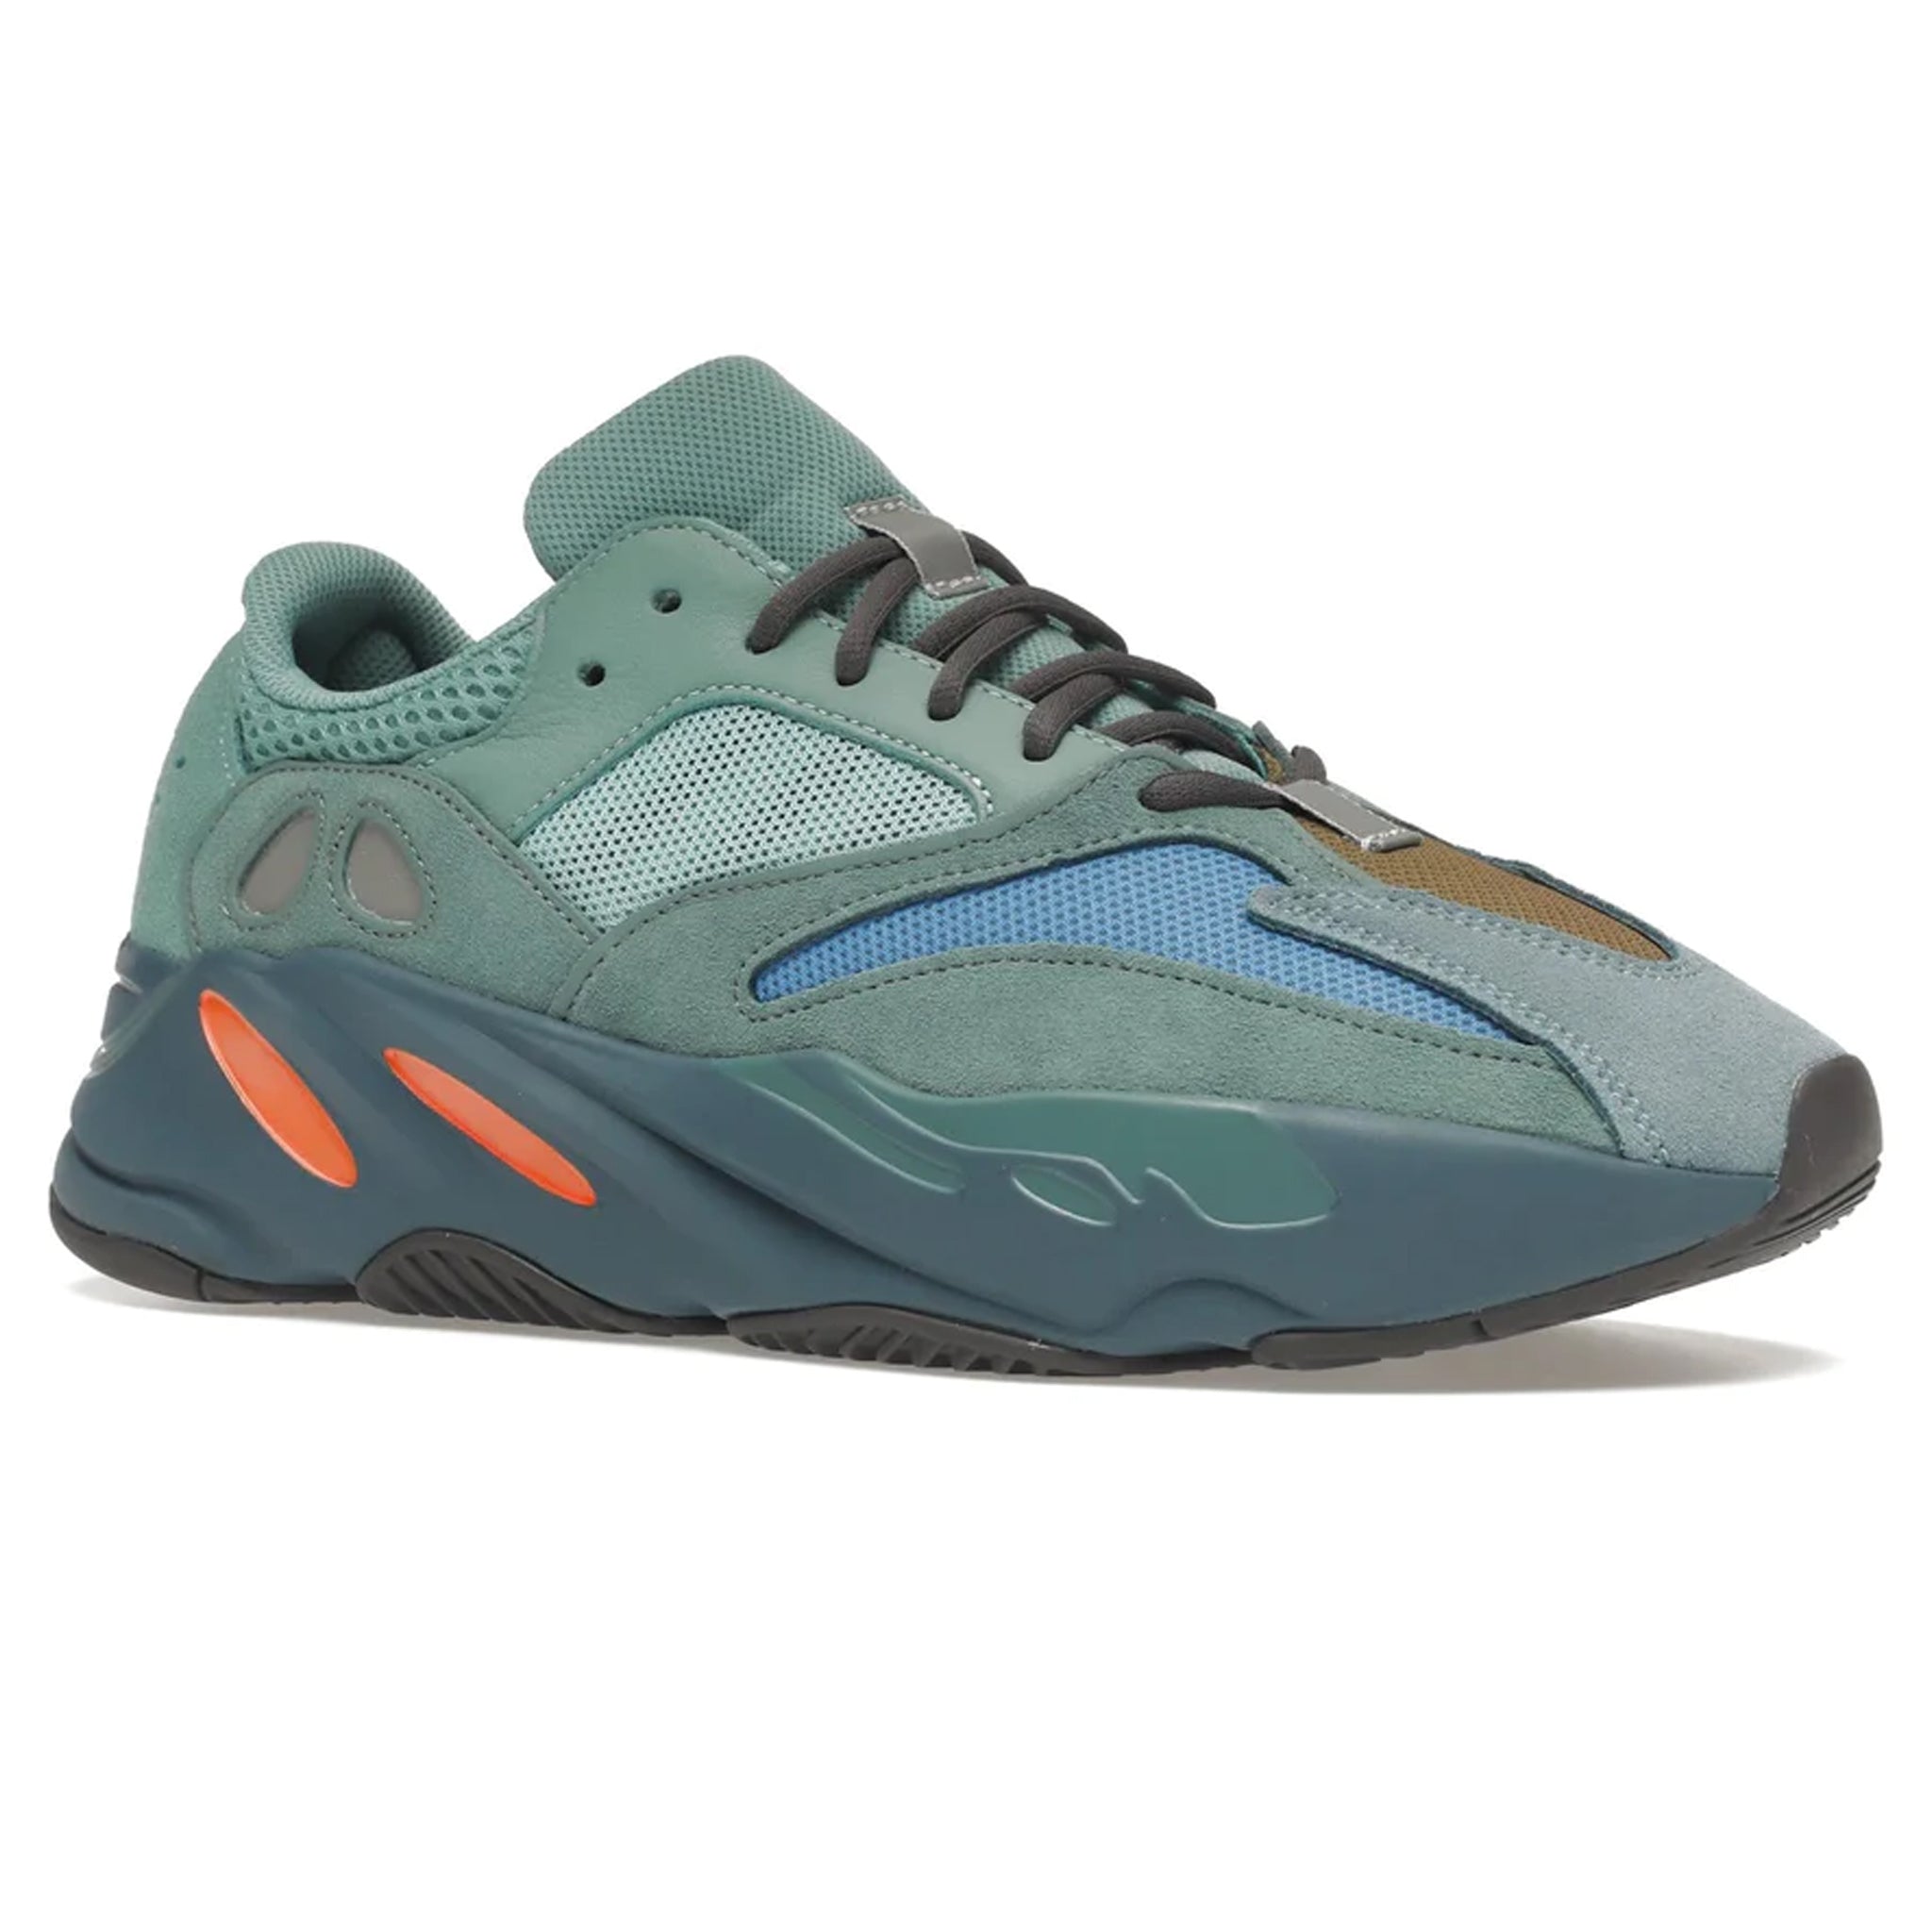 Front view of Adidas Yeezy Boost 700 Boost Faded Azure GZ2002